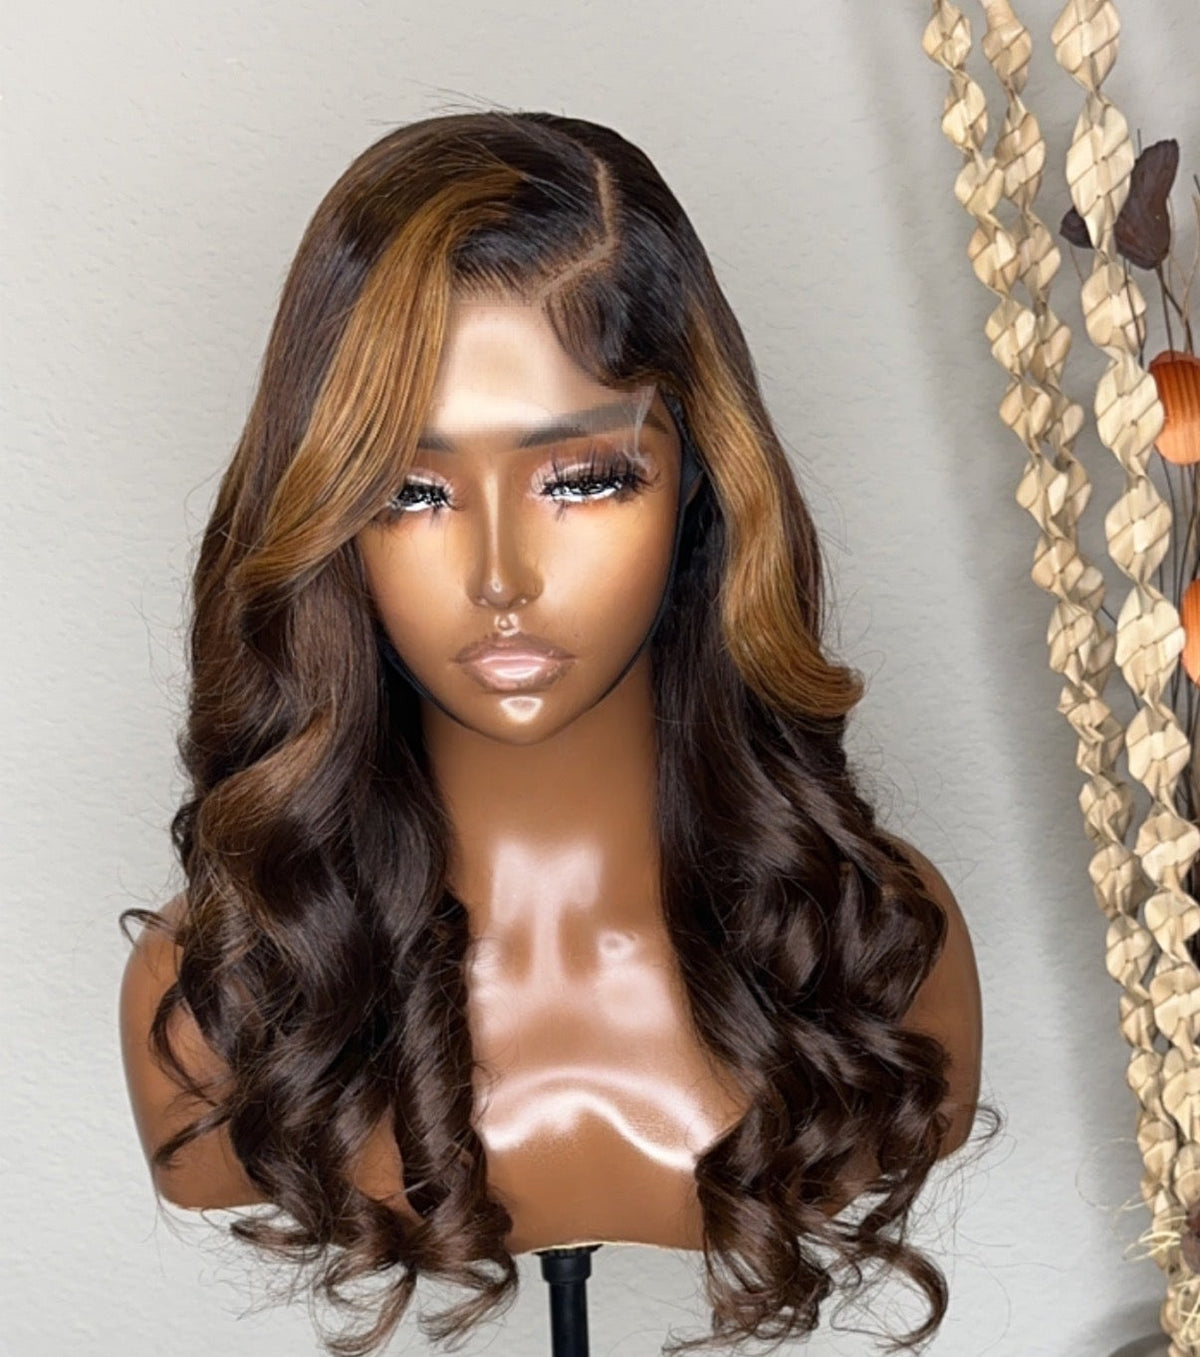 Glueless Hd Lace Wig Dark Brown with Blonde Highlights Body Wave